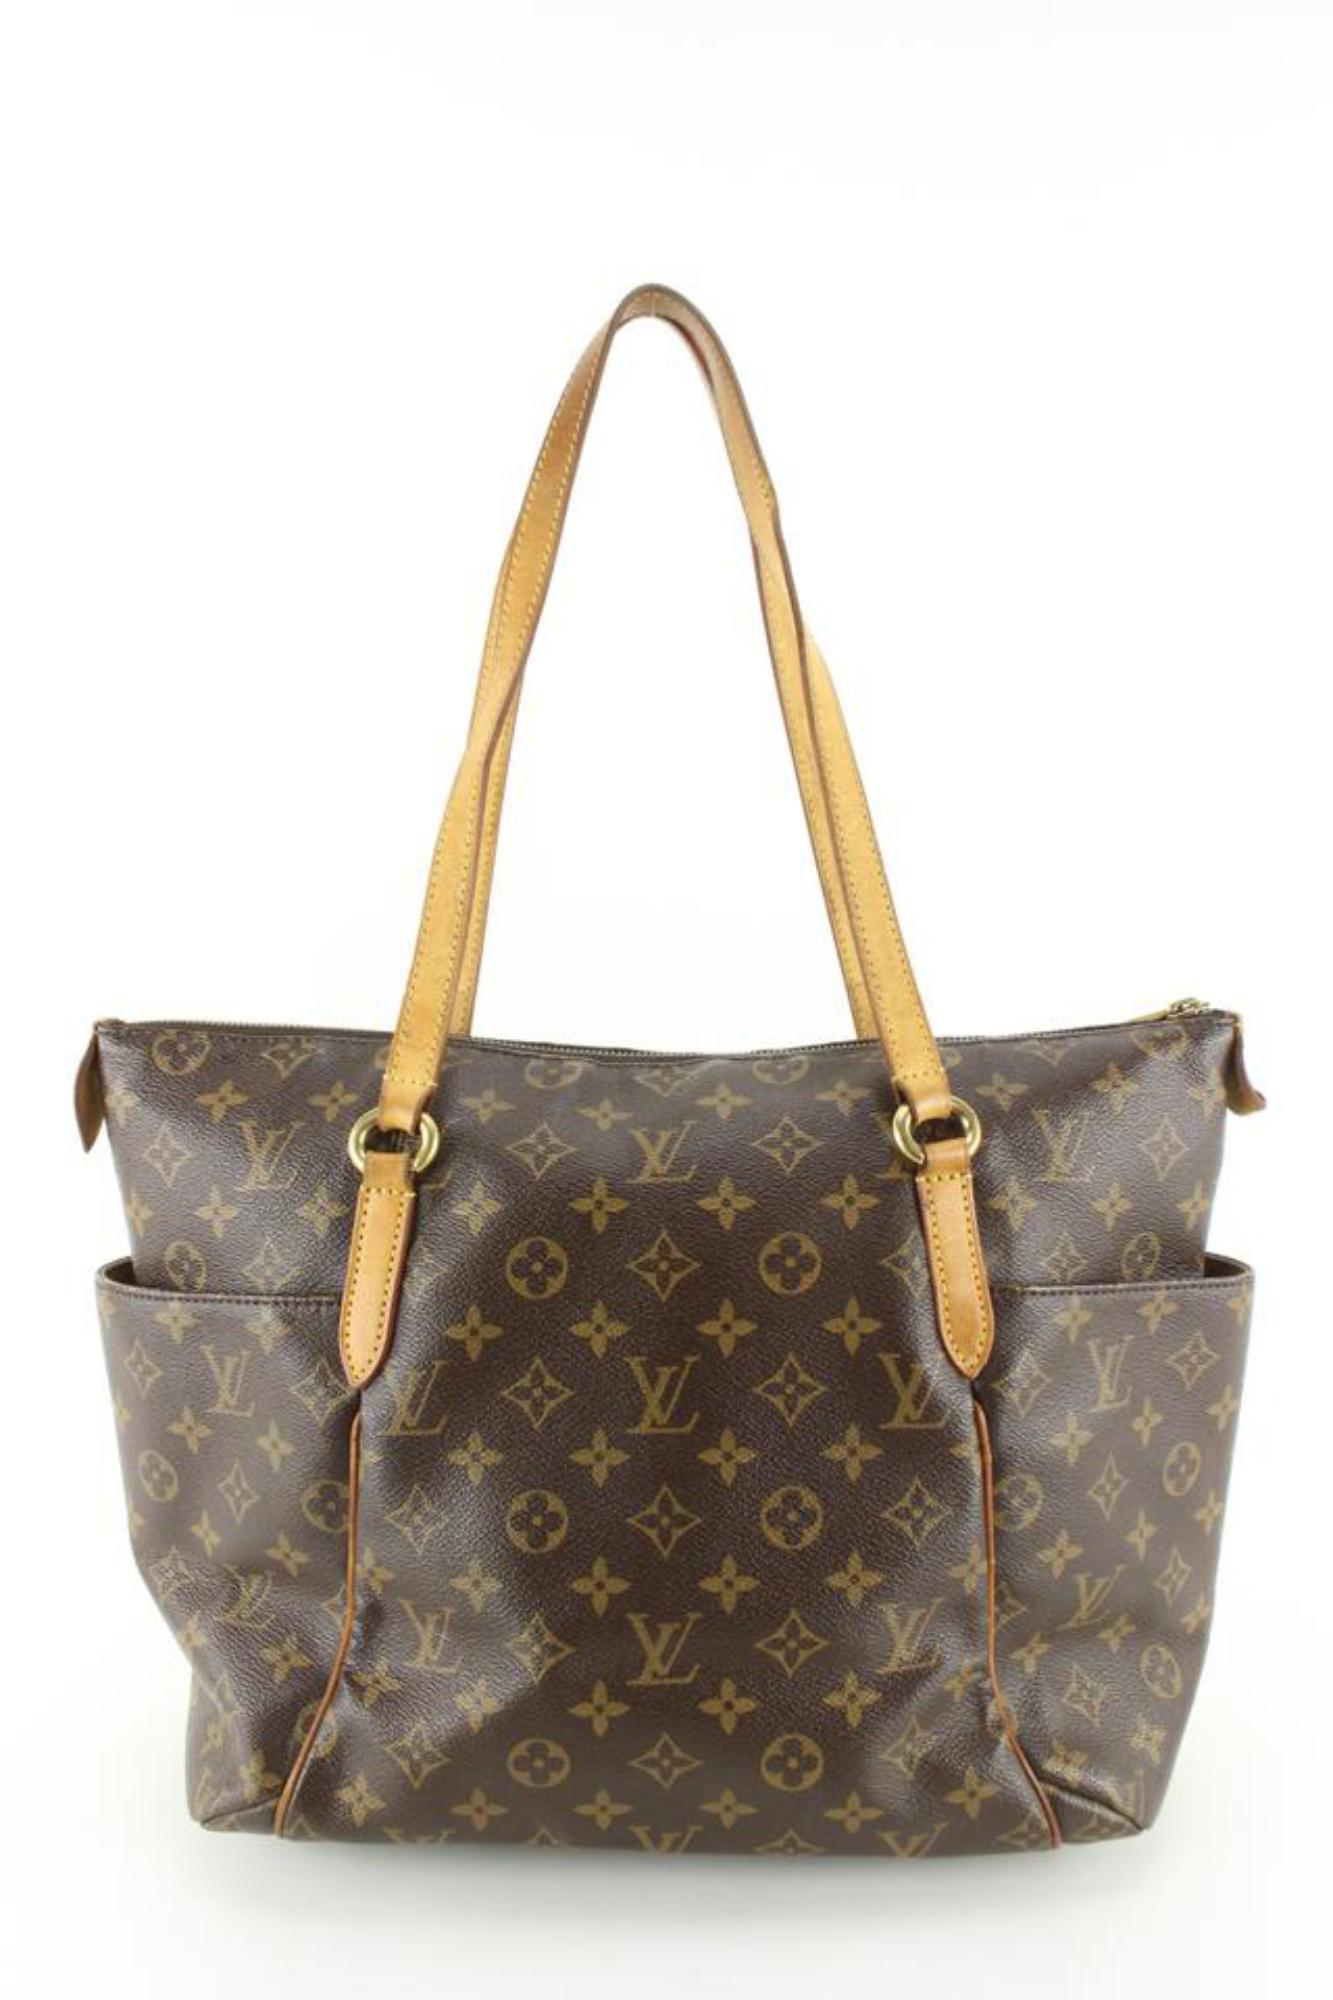 Louis Vuitton Monogram Totally PM Tote Bag 14lz720s For Sale 4